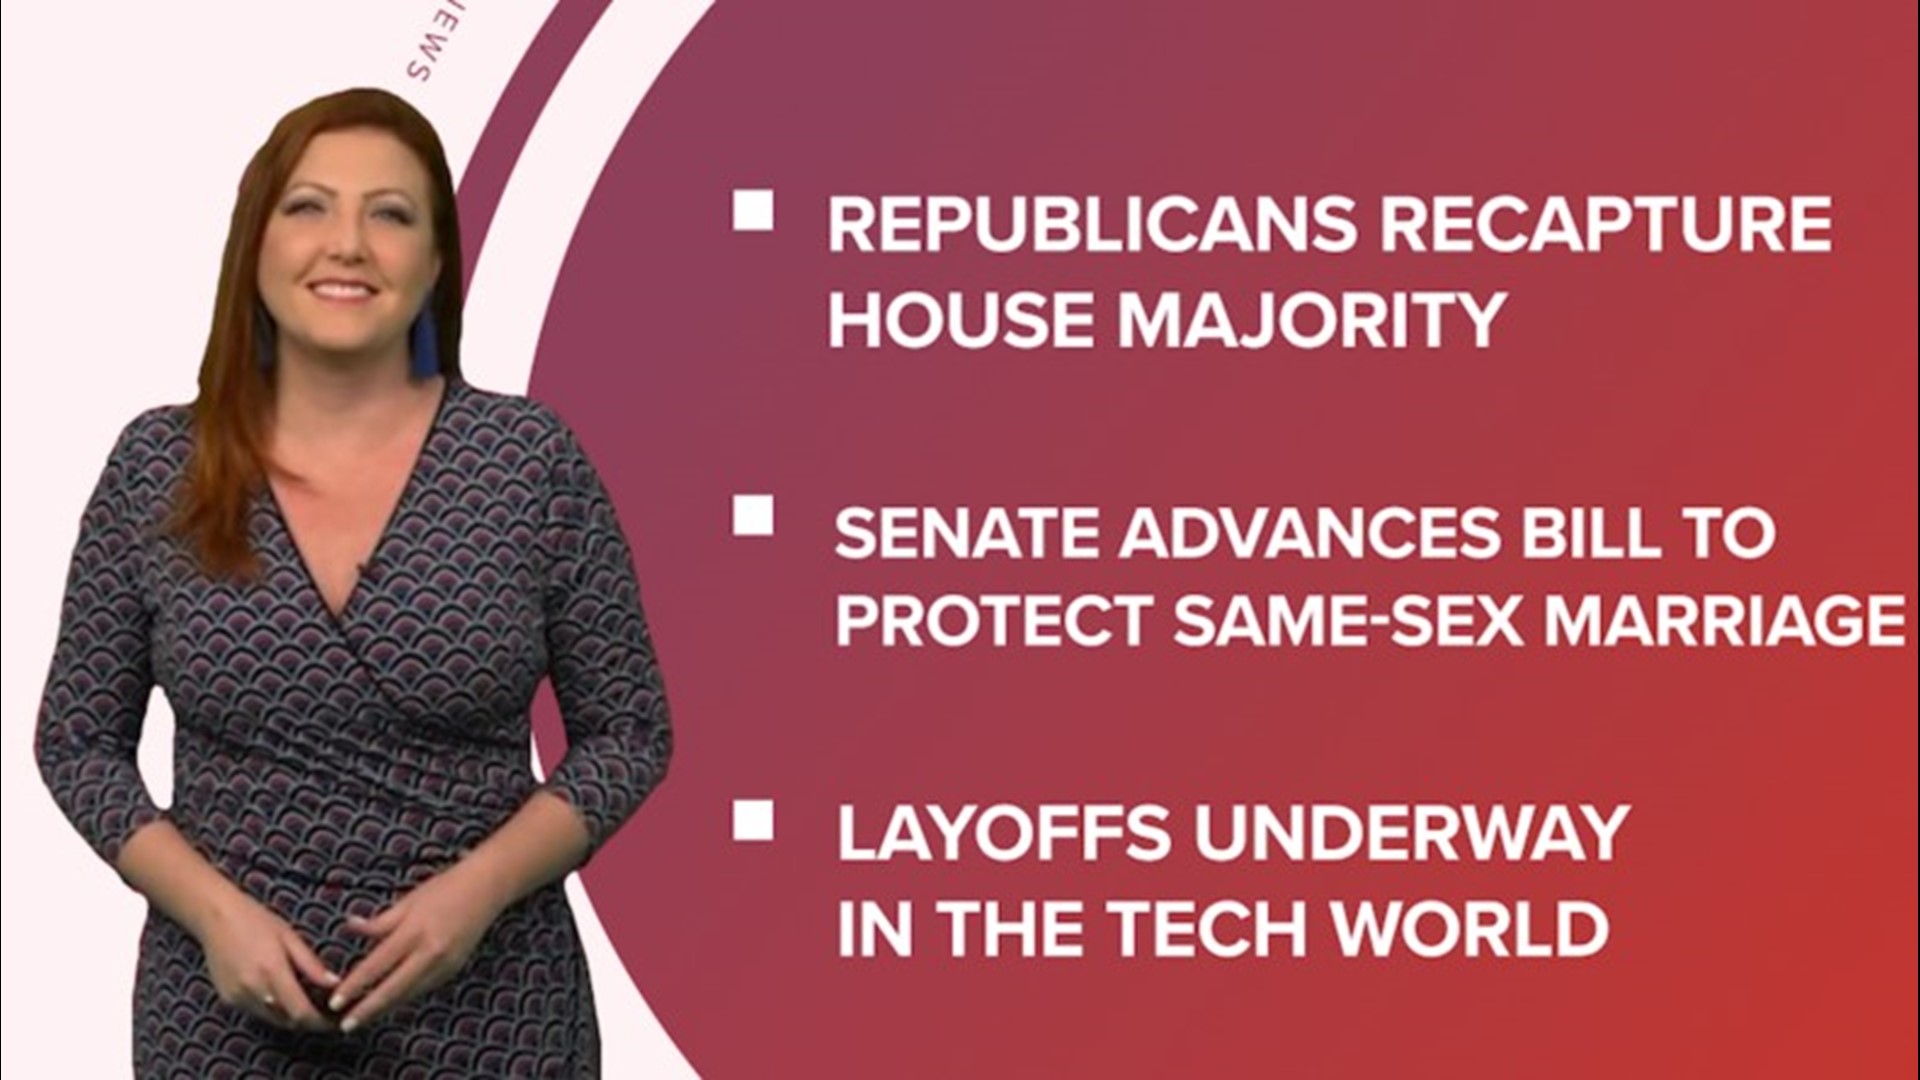 A look at what is happening in the news from Republicans gaining control of the House to a bill to protect same-sex marriage and calls to investigate Ticketmaster.